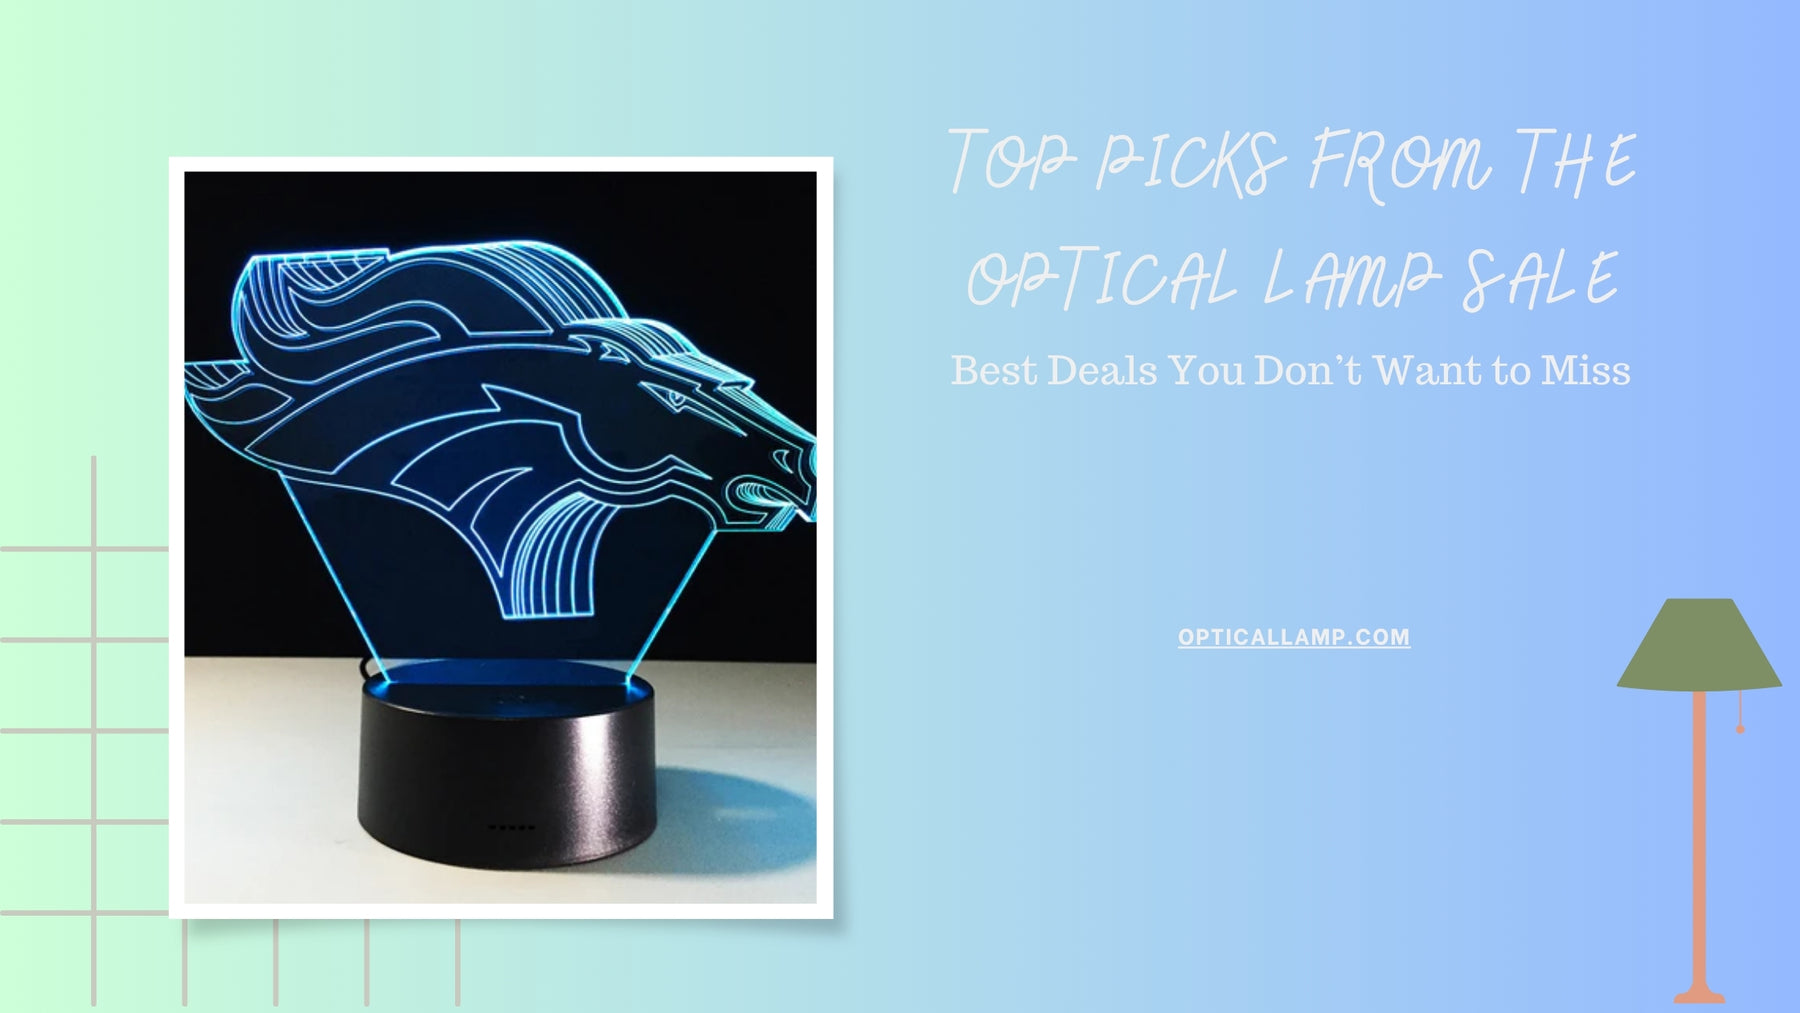 Top Picks from the Optical Lamp Sale: Best Deals You Don’t Want to Miss